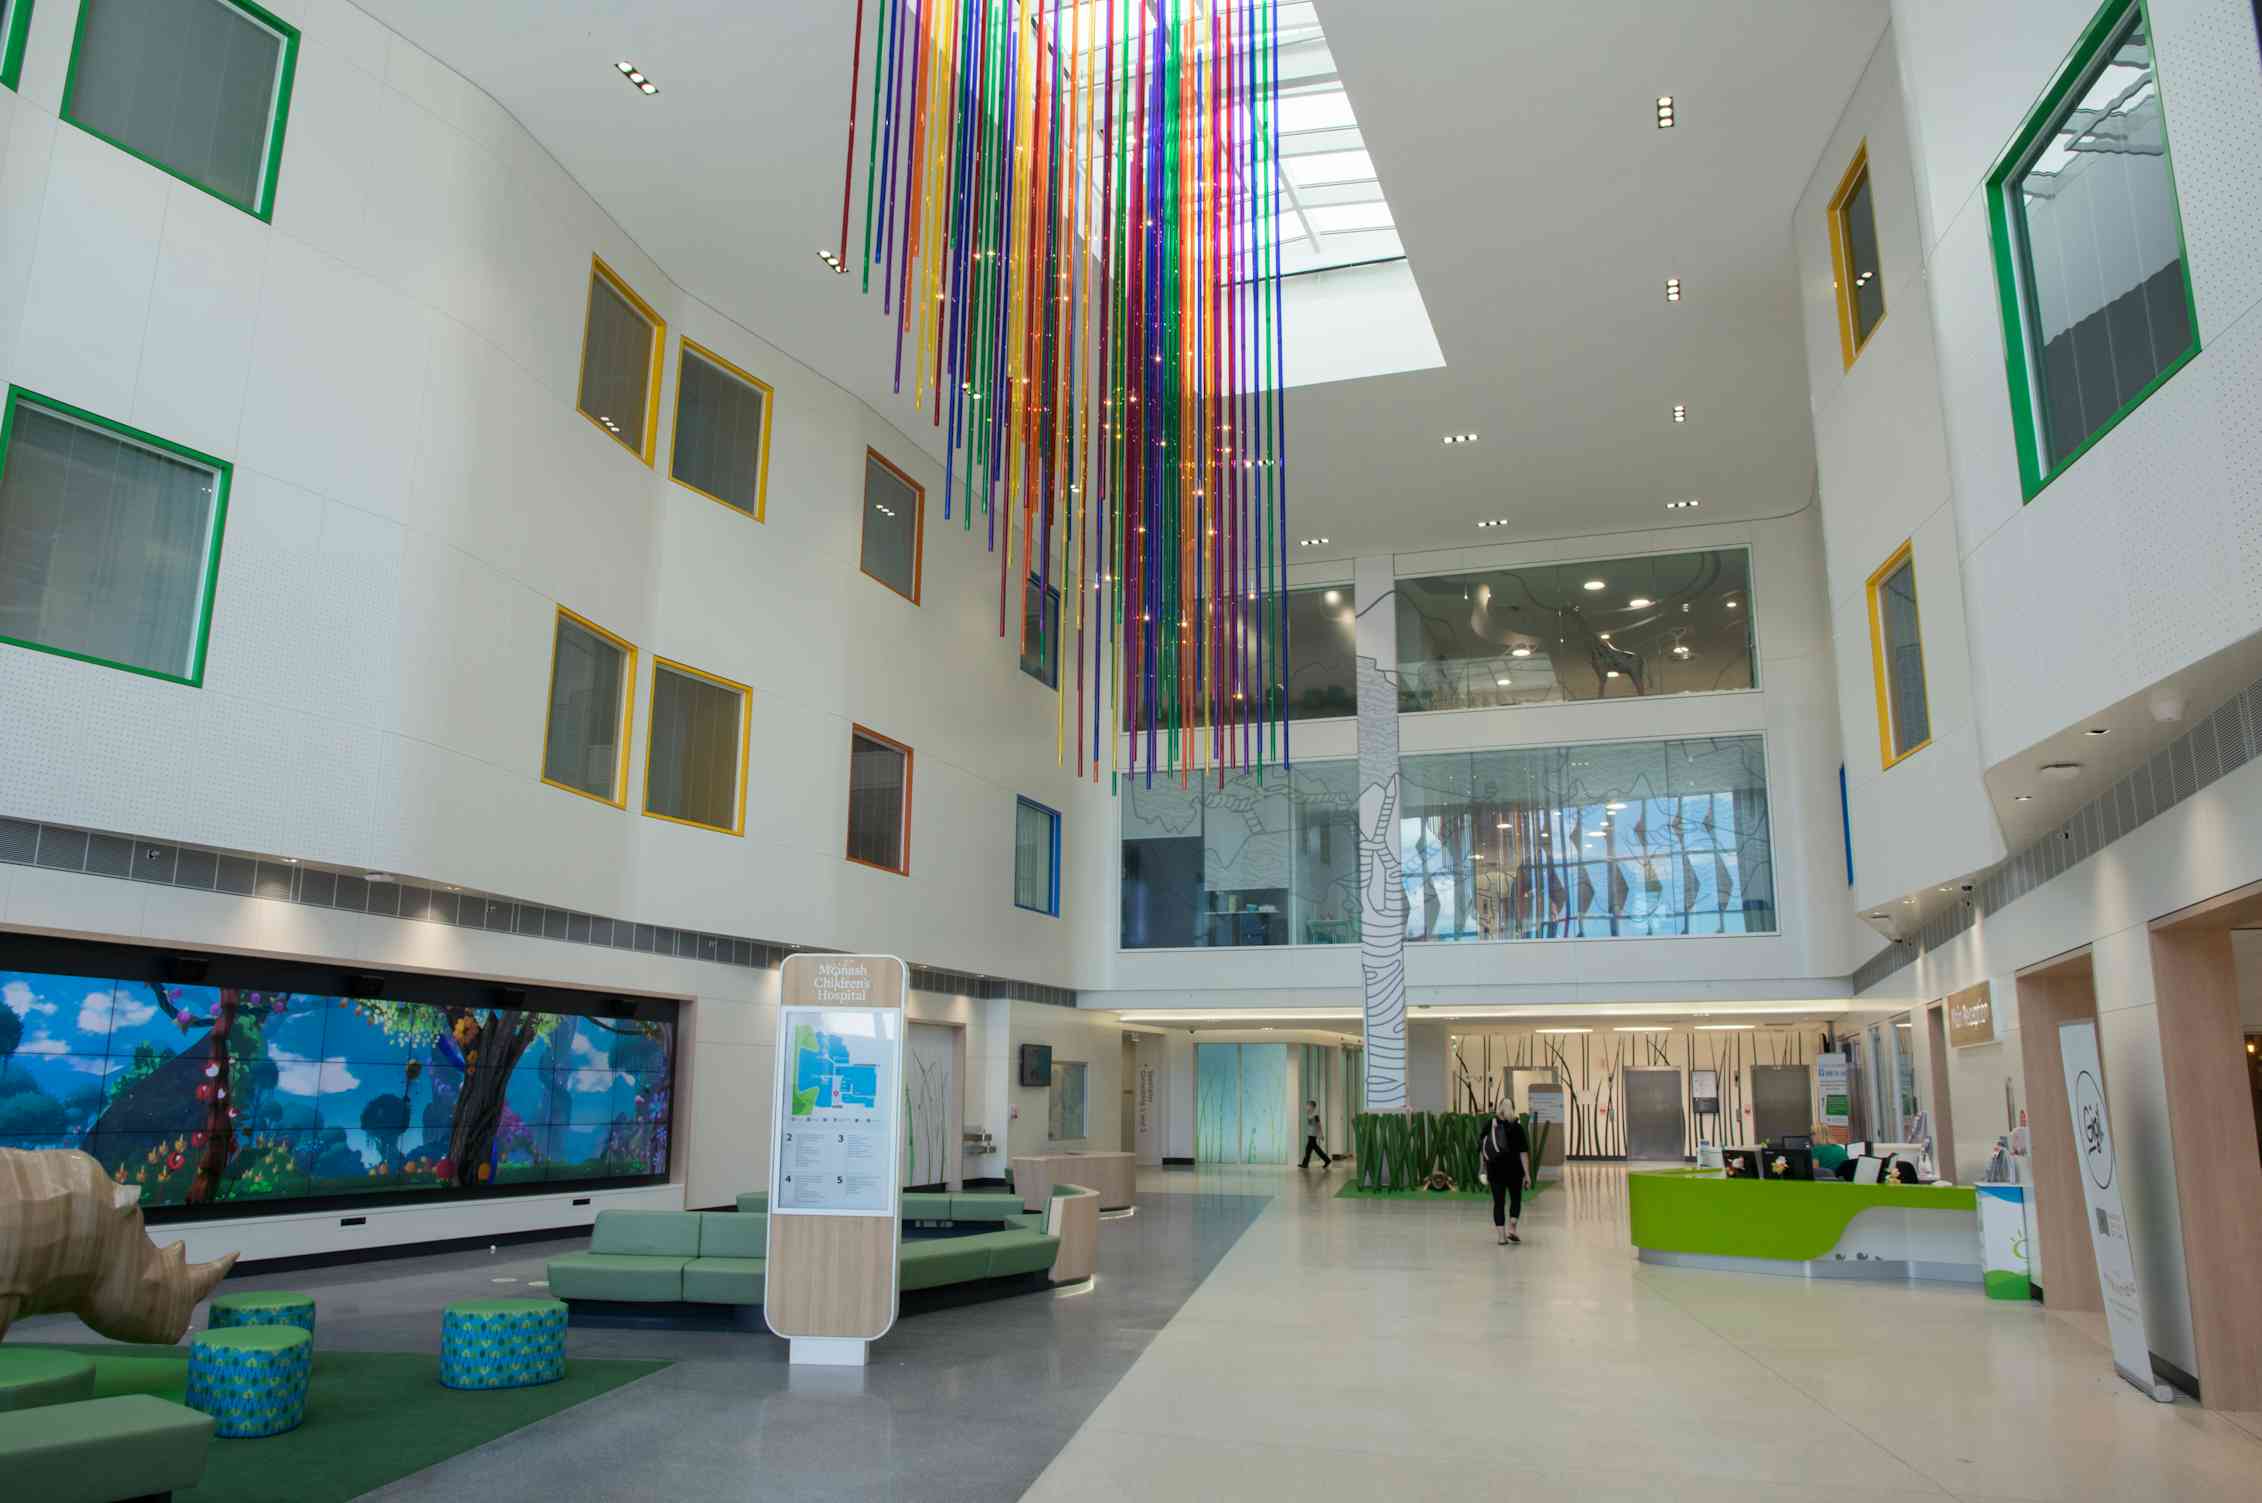 Colourful streams hang from a very high ceiling in a hospital foyer as a person walks through.